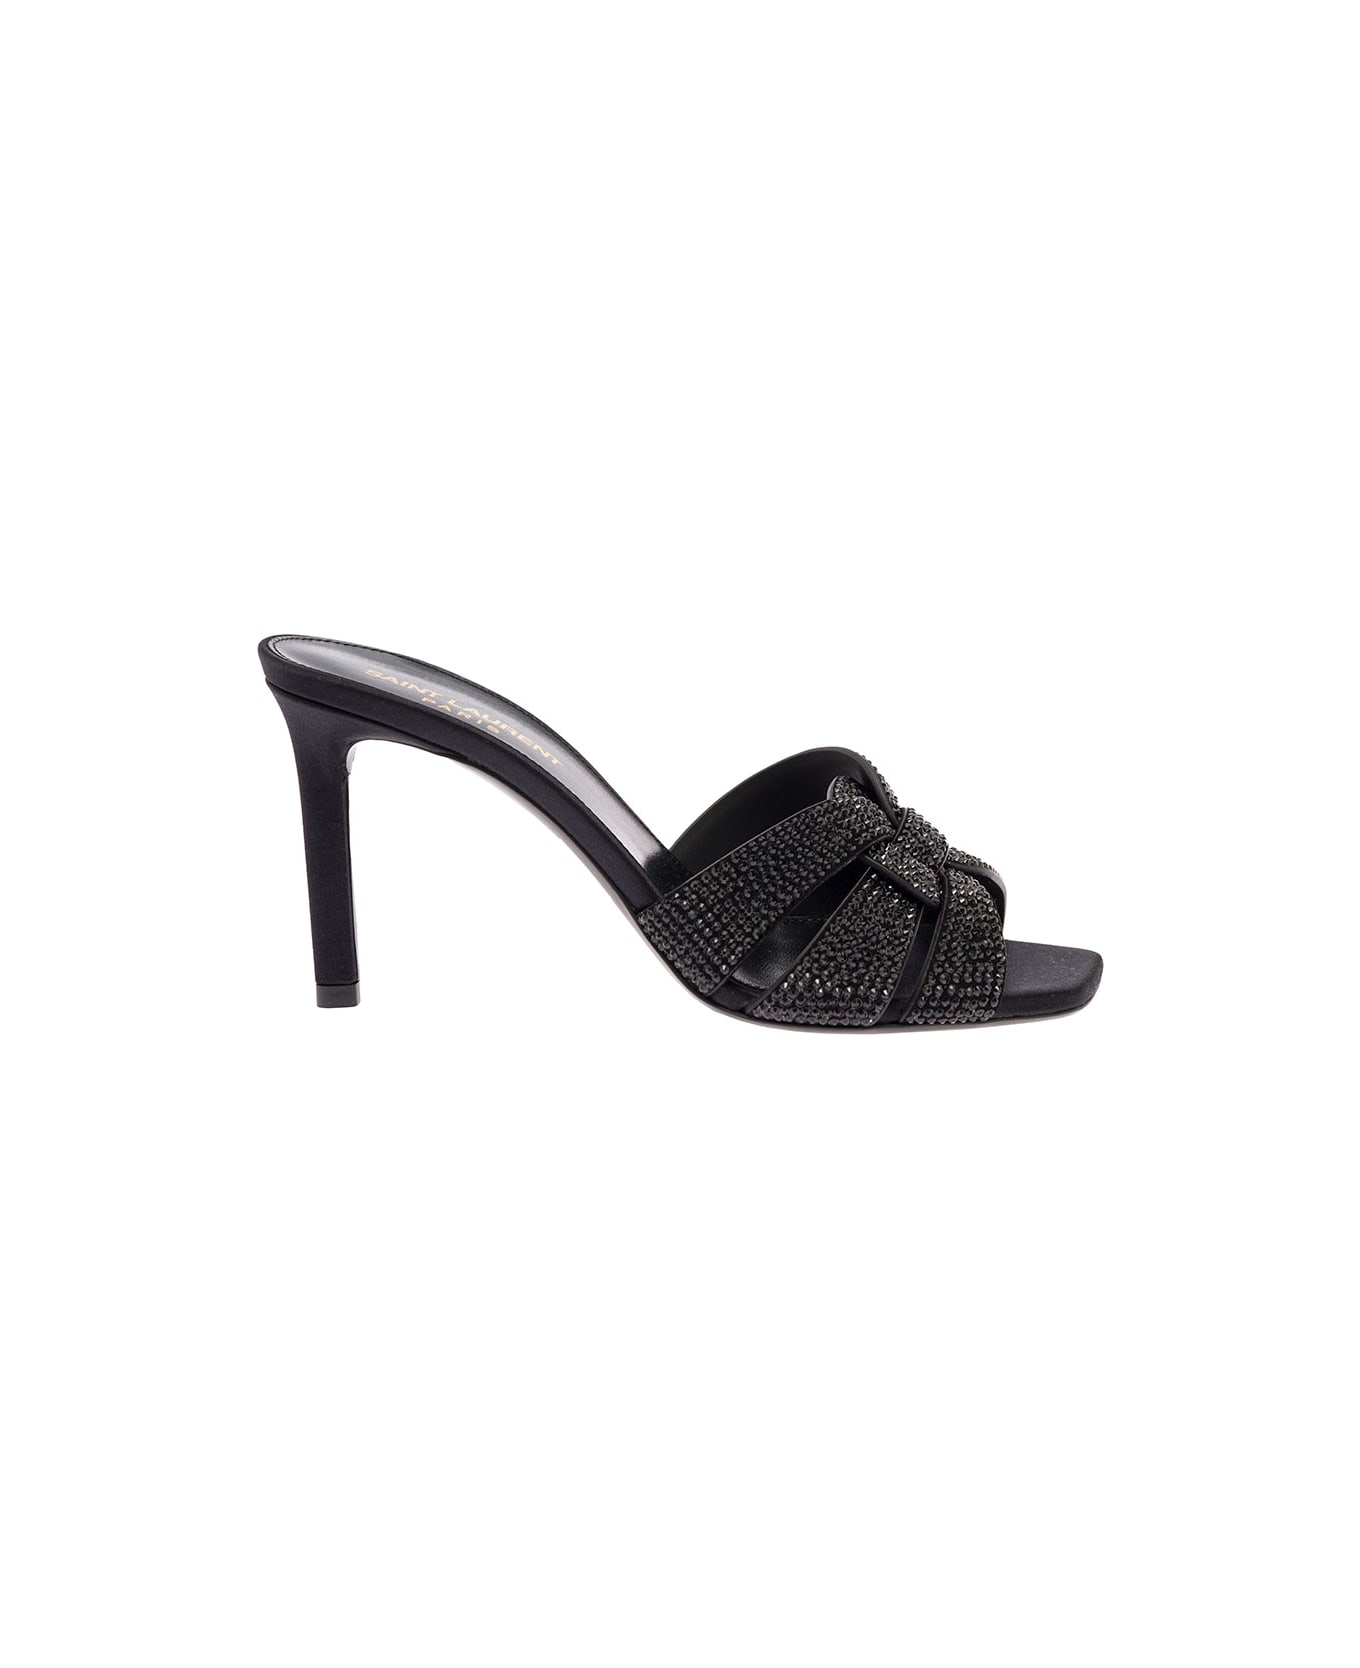 Saint Laurent Woman's Tribute Suede And Strass Mules - Black サンダル